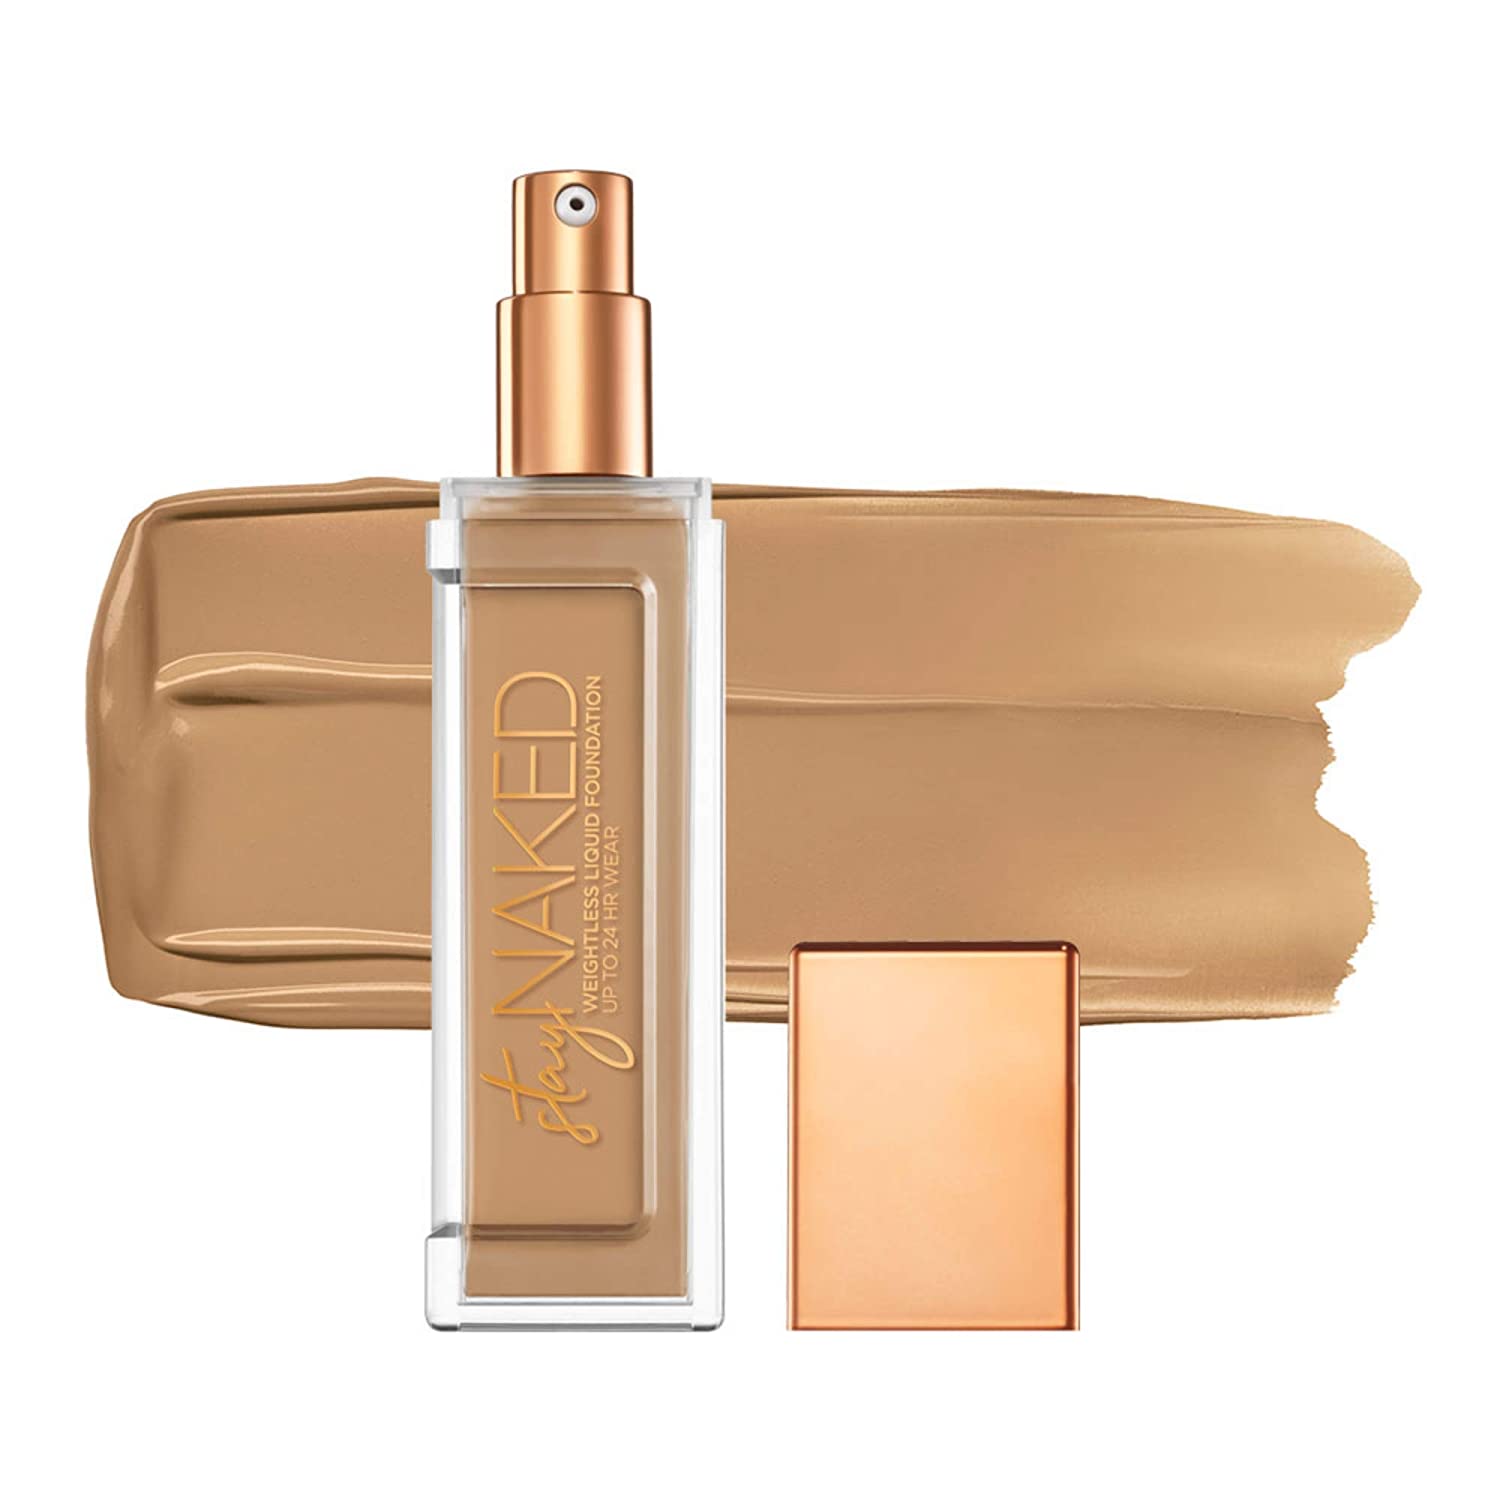 Urban Decay Stay Naked Weightless Liquid Foundation 1 Oz 